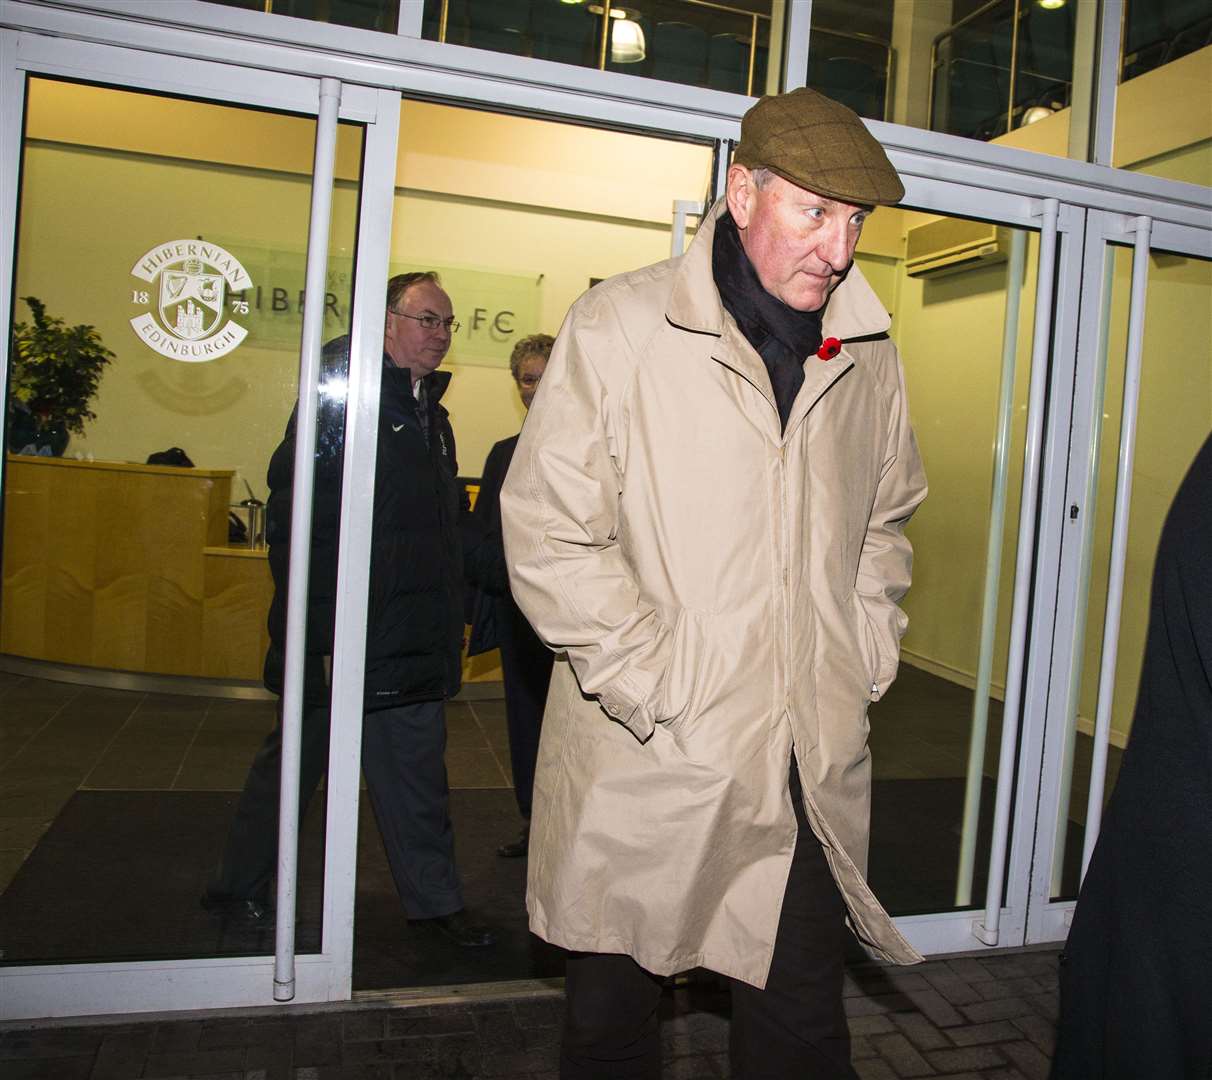 Terry Butcher leaves Easter Road stadium after watching from the stands as Caley Thistle defeated Hibs in November 2013. Two days later, he joined the Edinburgh club. The manner of his leaving upset supporters and some connected to the club.